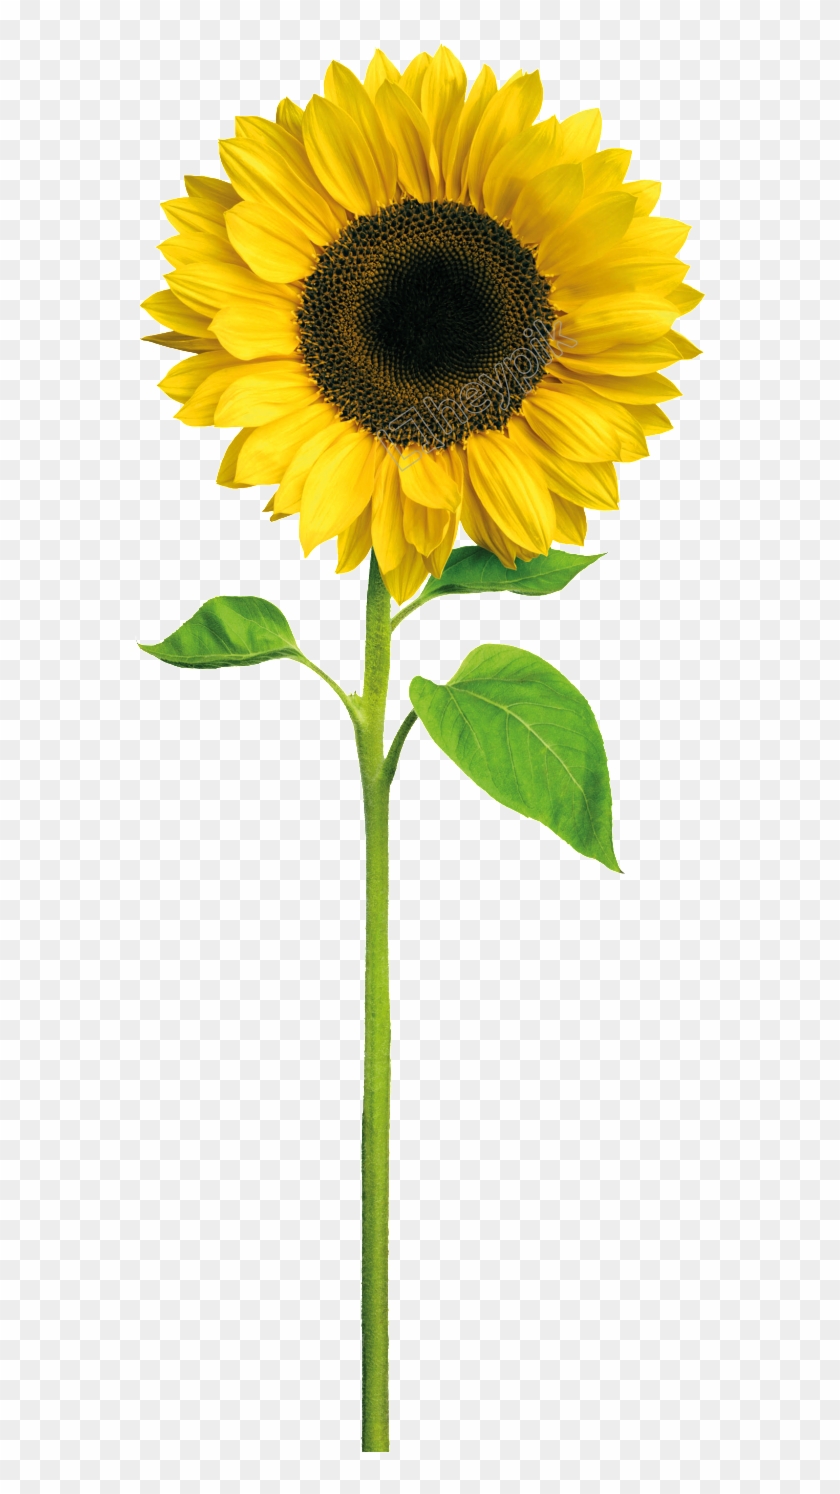 Sunflowers Vector Crown - Sunflower With Stem Png, Transparent Png